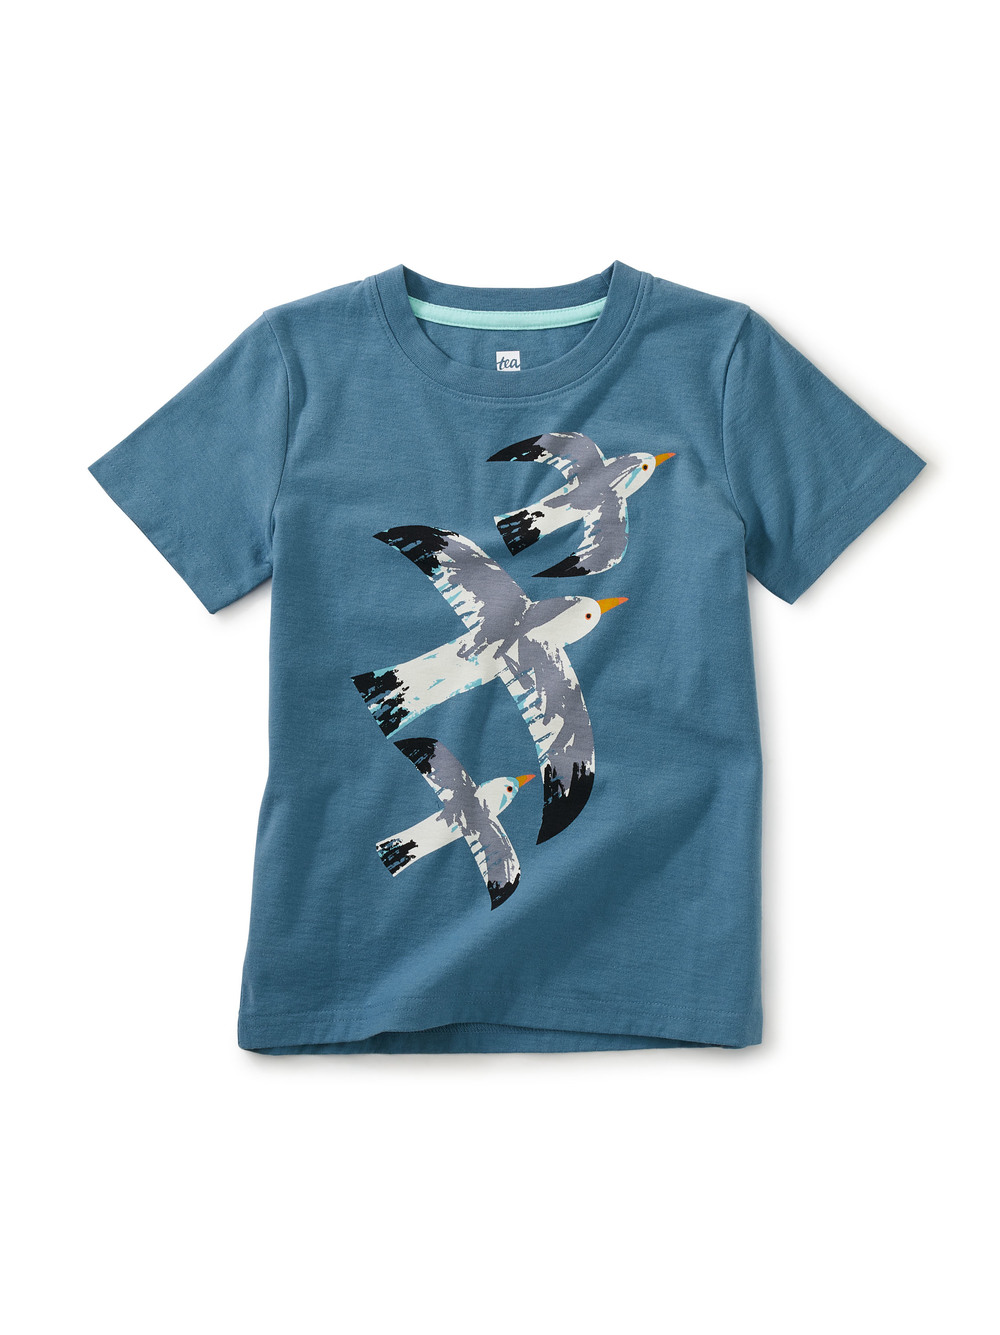 Gulls' Travels Graphic Tee | Tea Collection